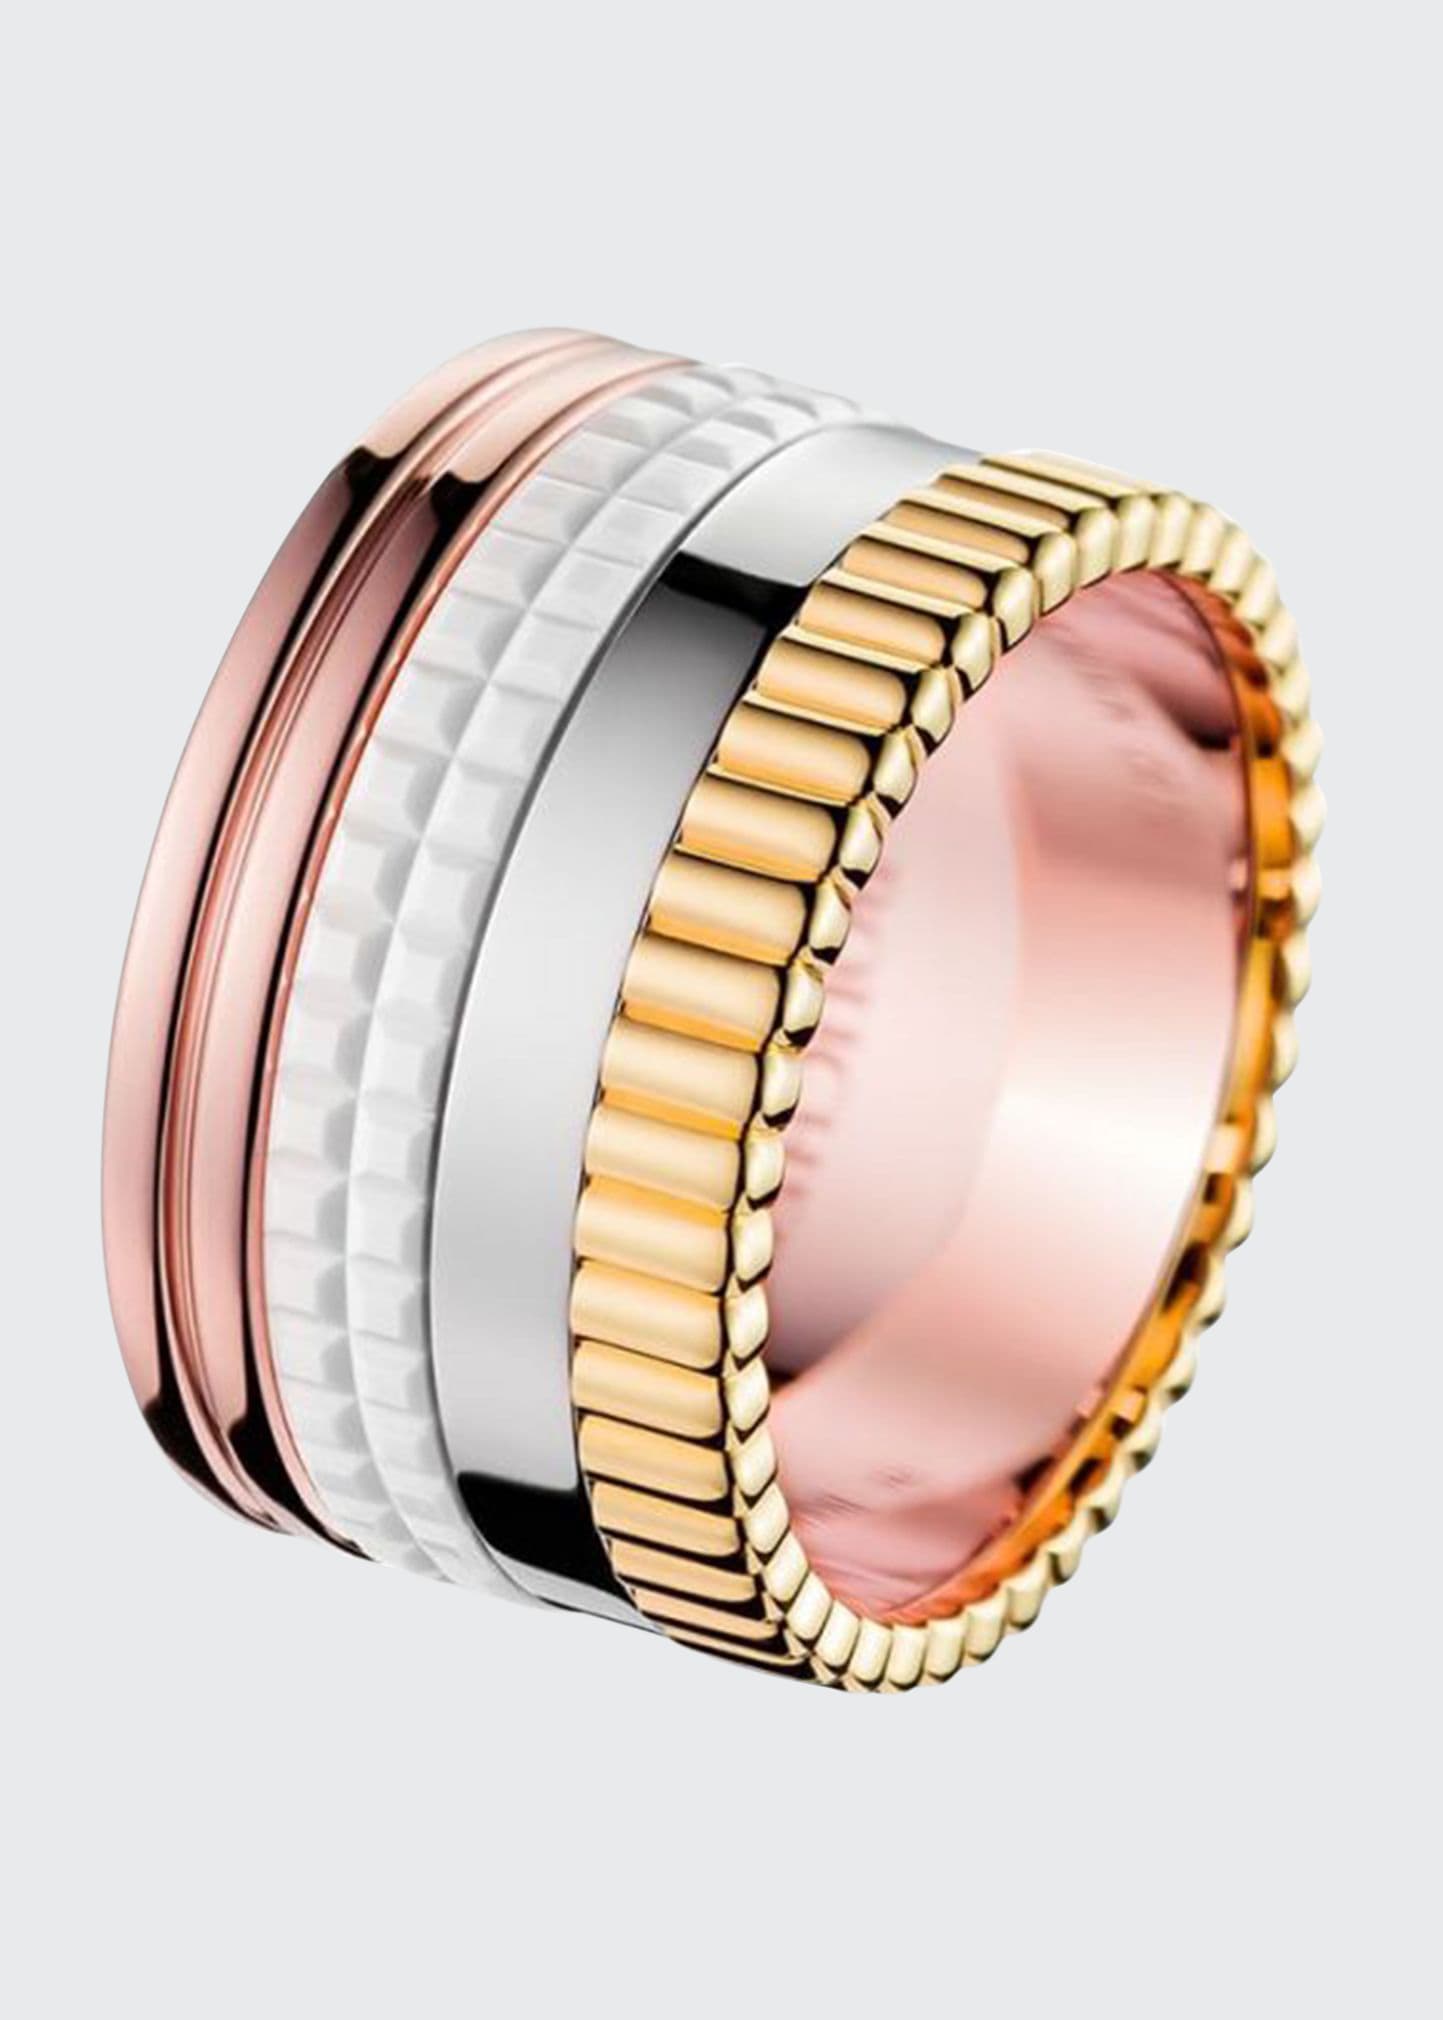 Boucheron Quatre Large Ring in Tricolor Gold and White Ceramic, Size 52